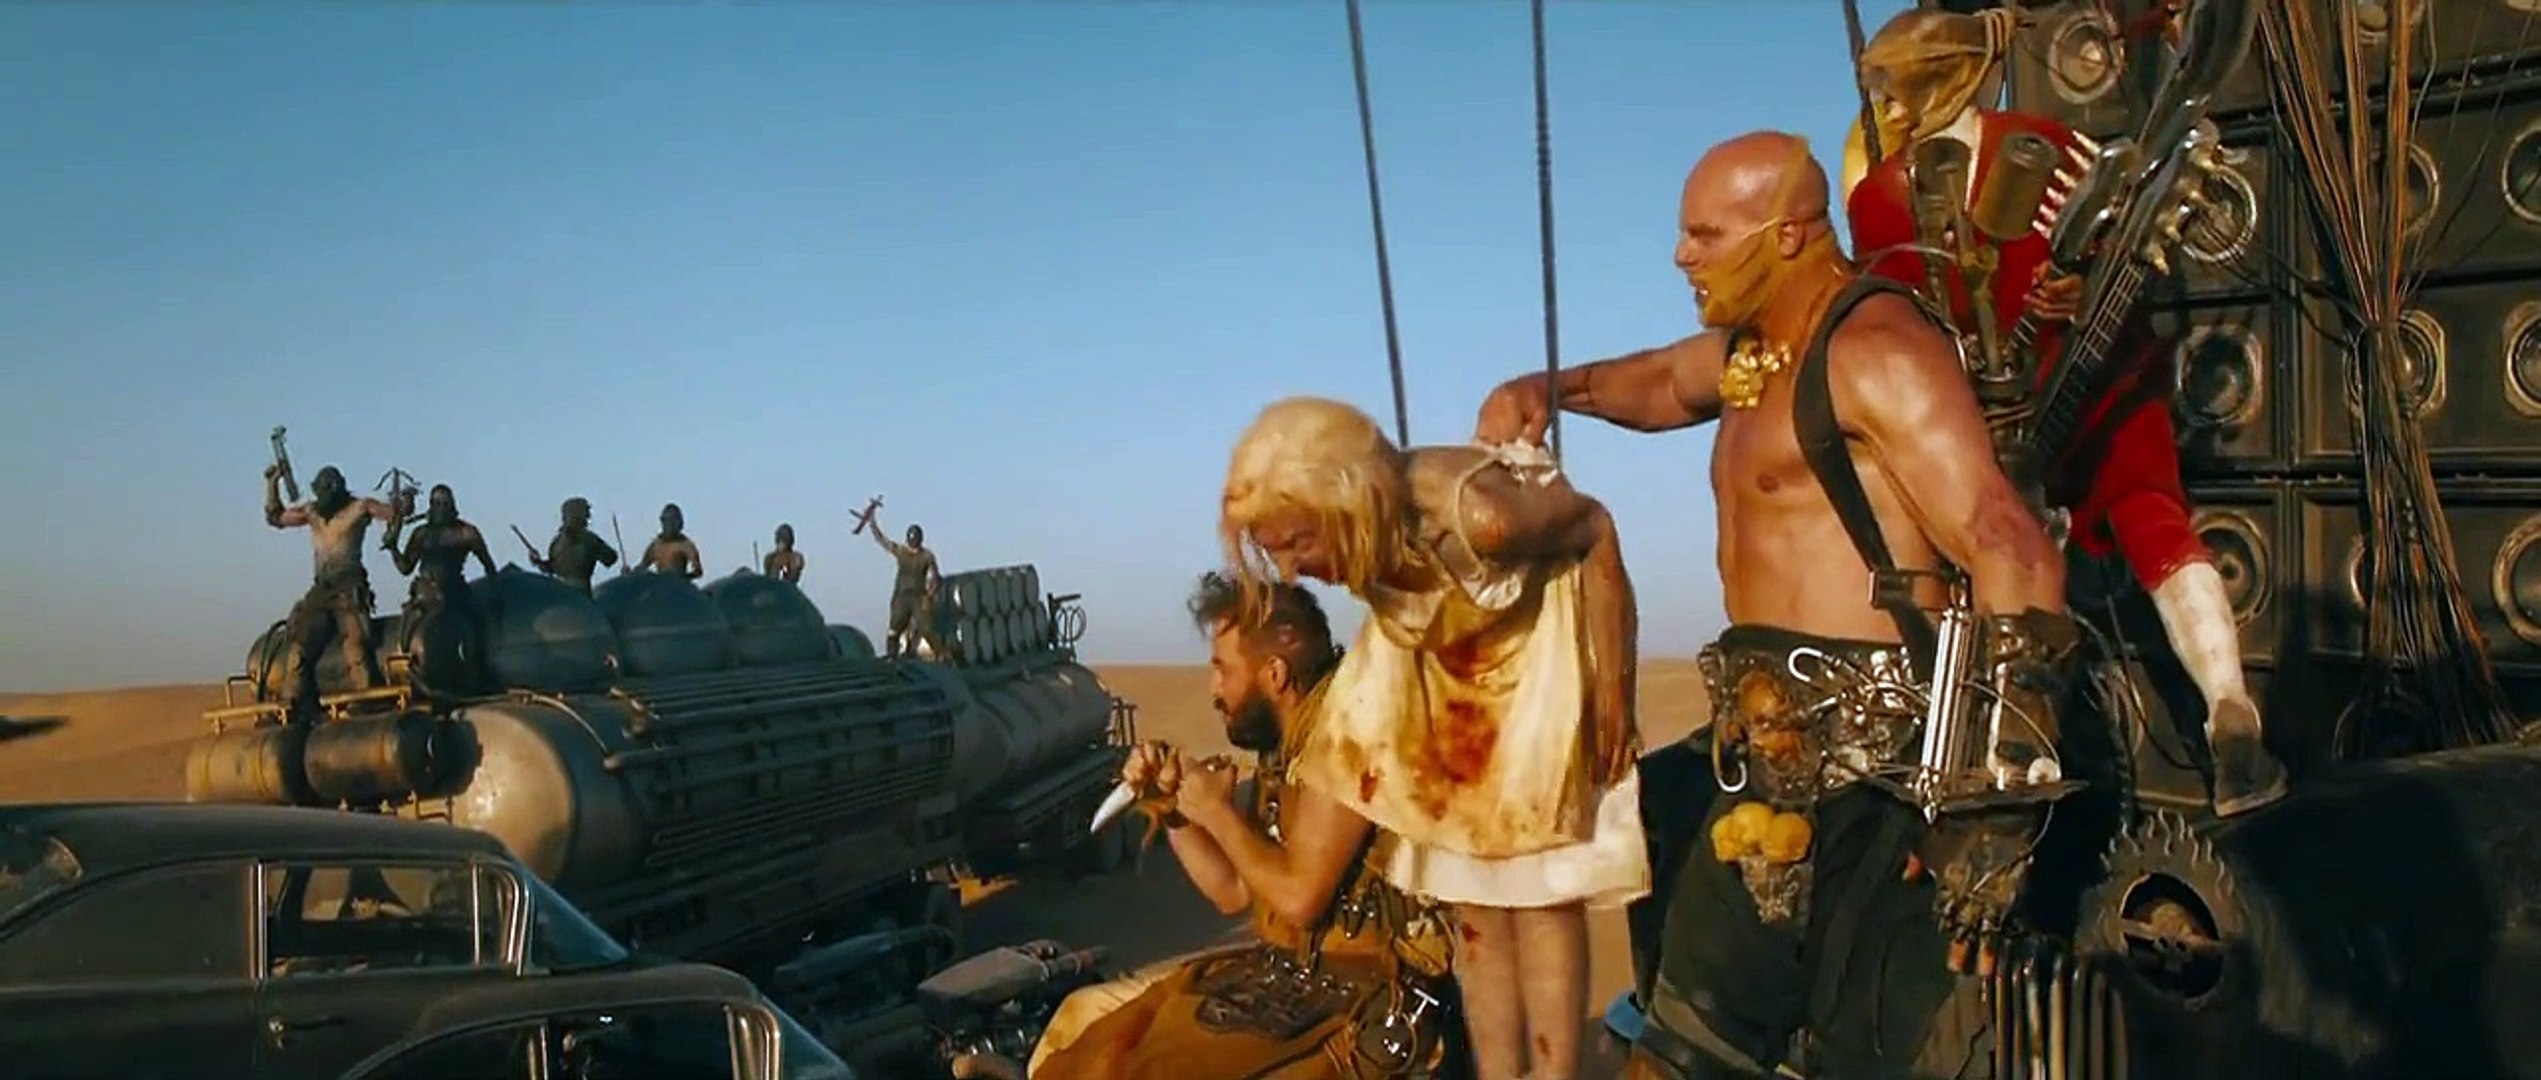 Mad Max Fury Road - Deleted Scenes - Vidéo Dailymotion